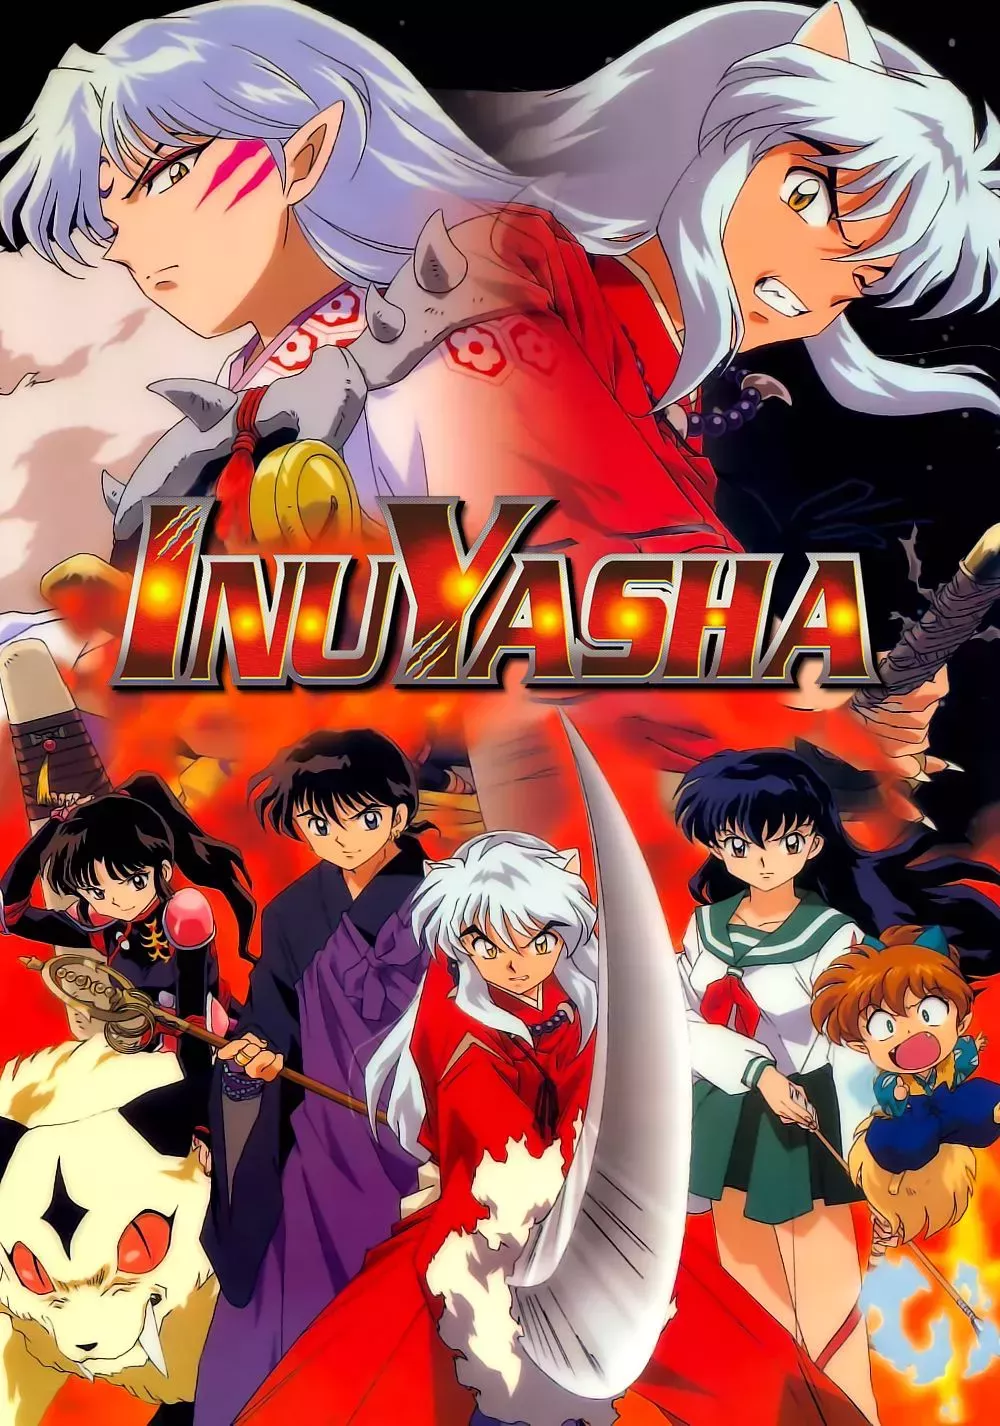 Cast of Inuyasha posing on the offcial anime poster